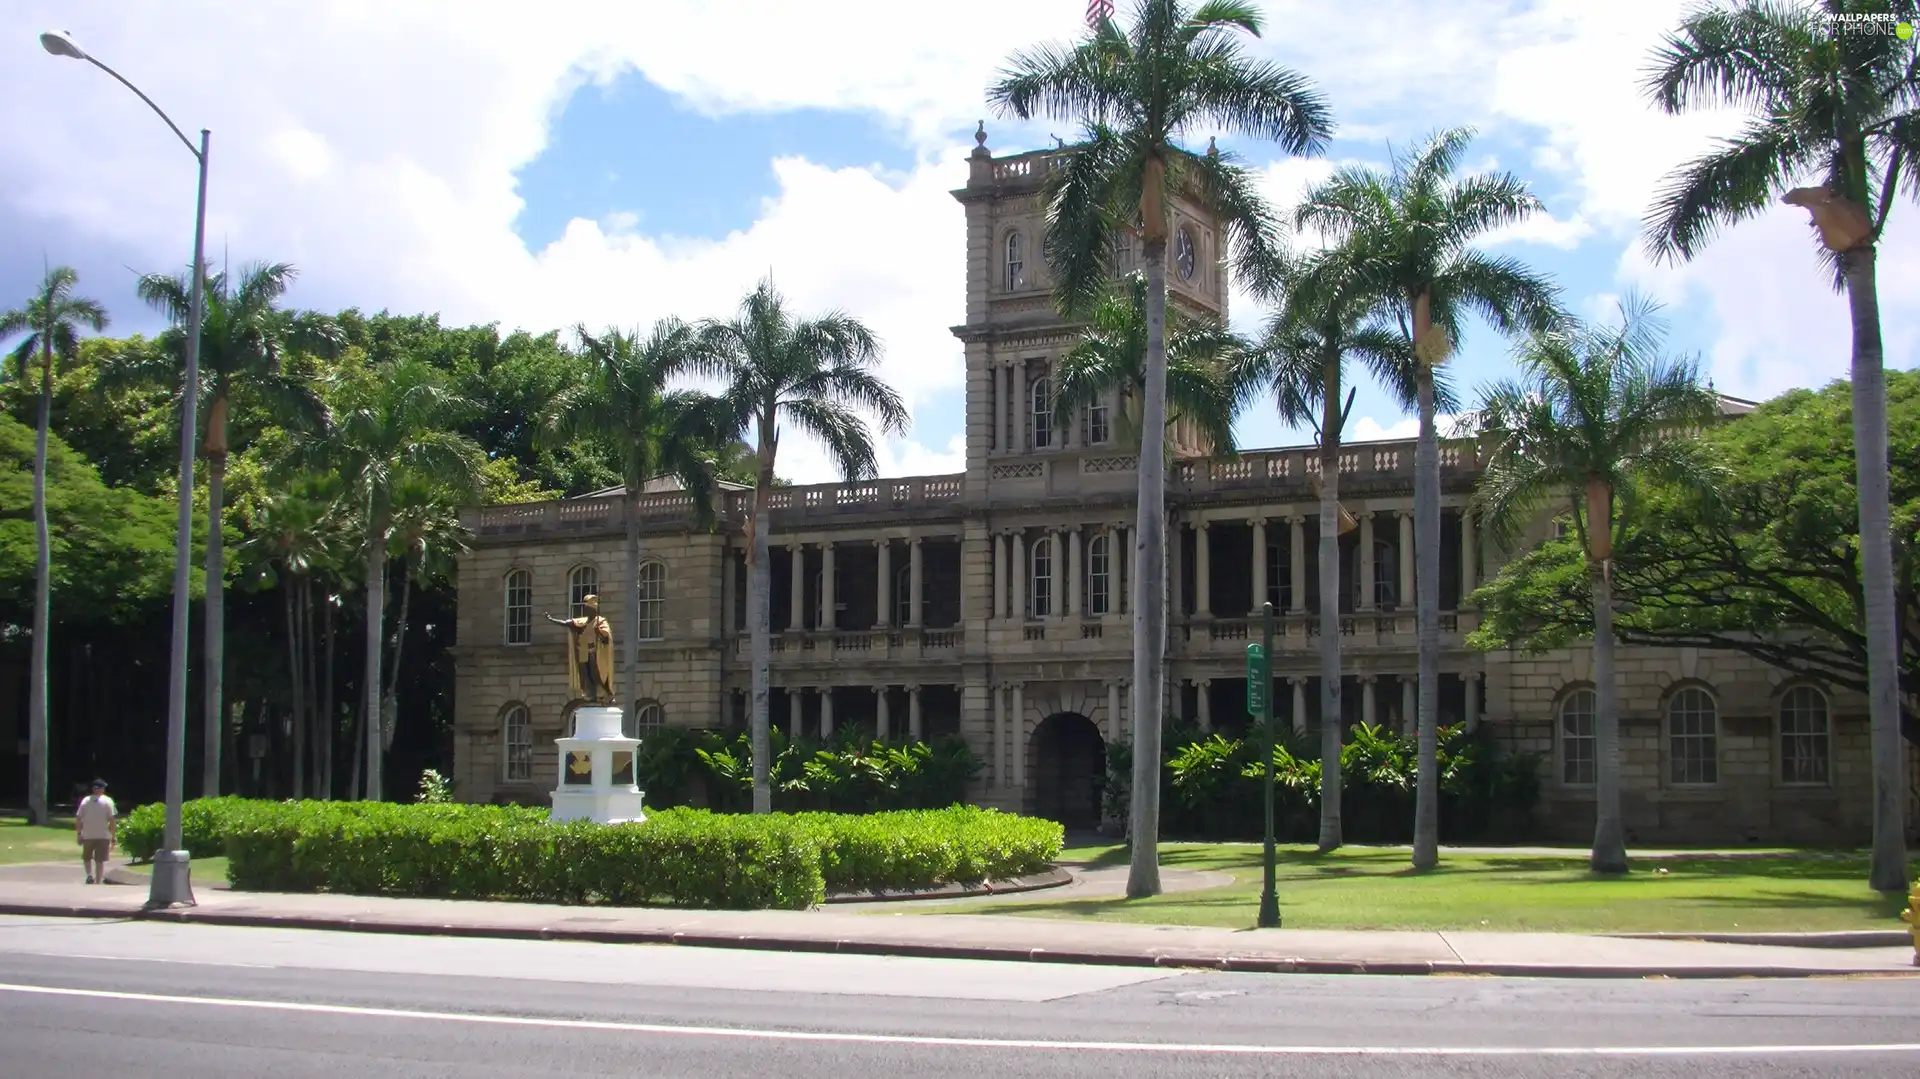 The Supreme Court, The United States, Palms, Human, Monument, Honolulu